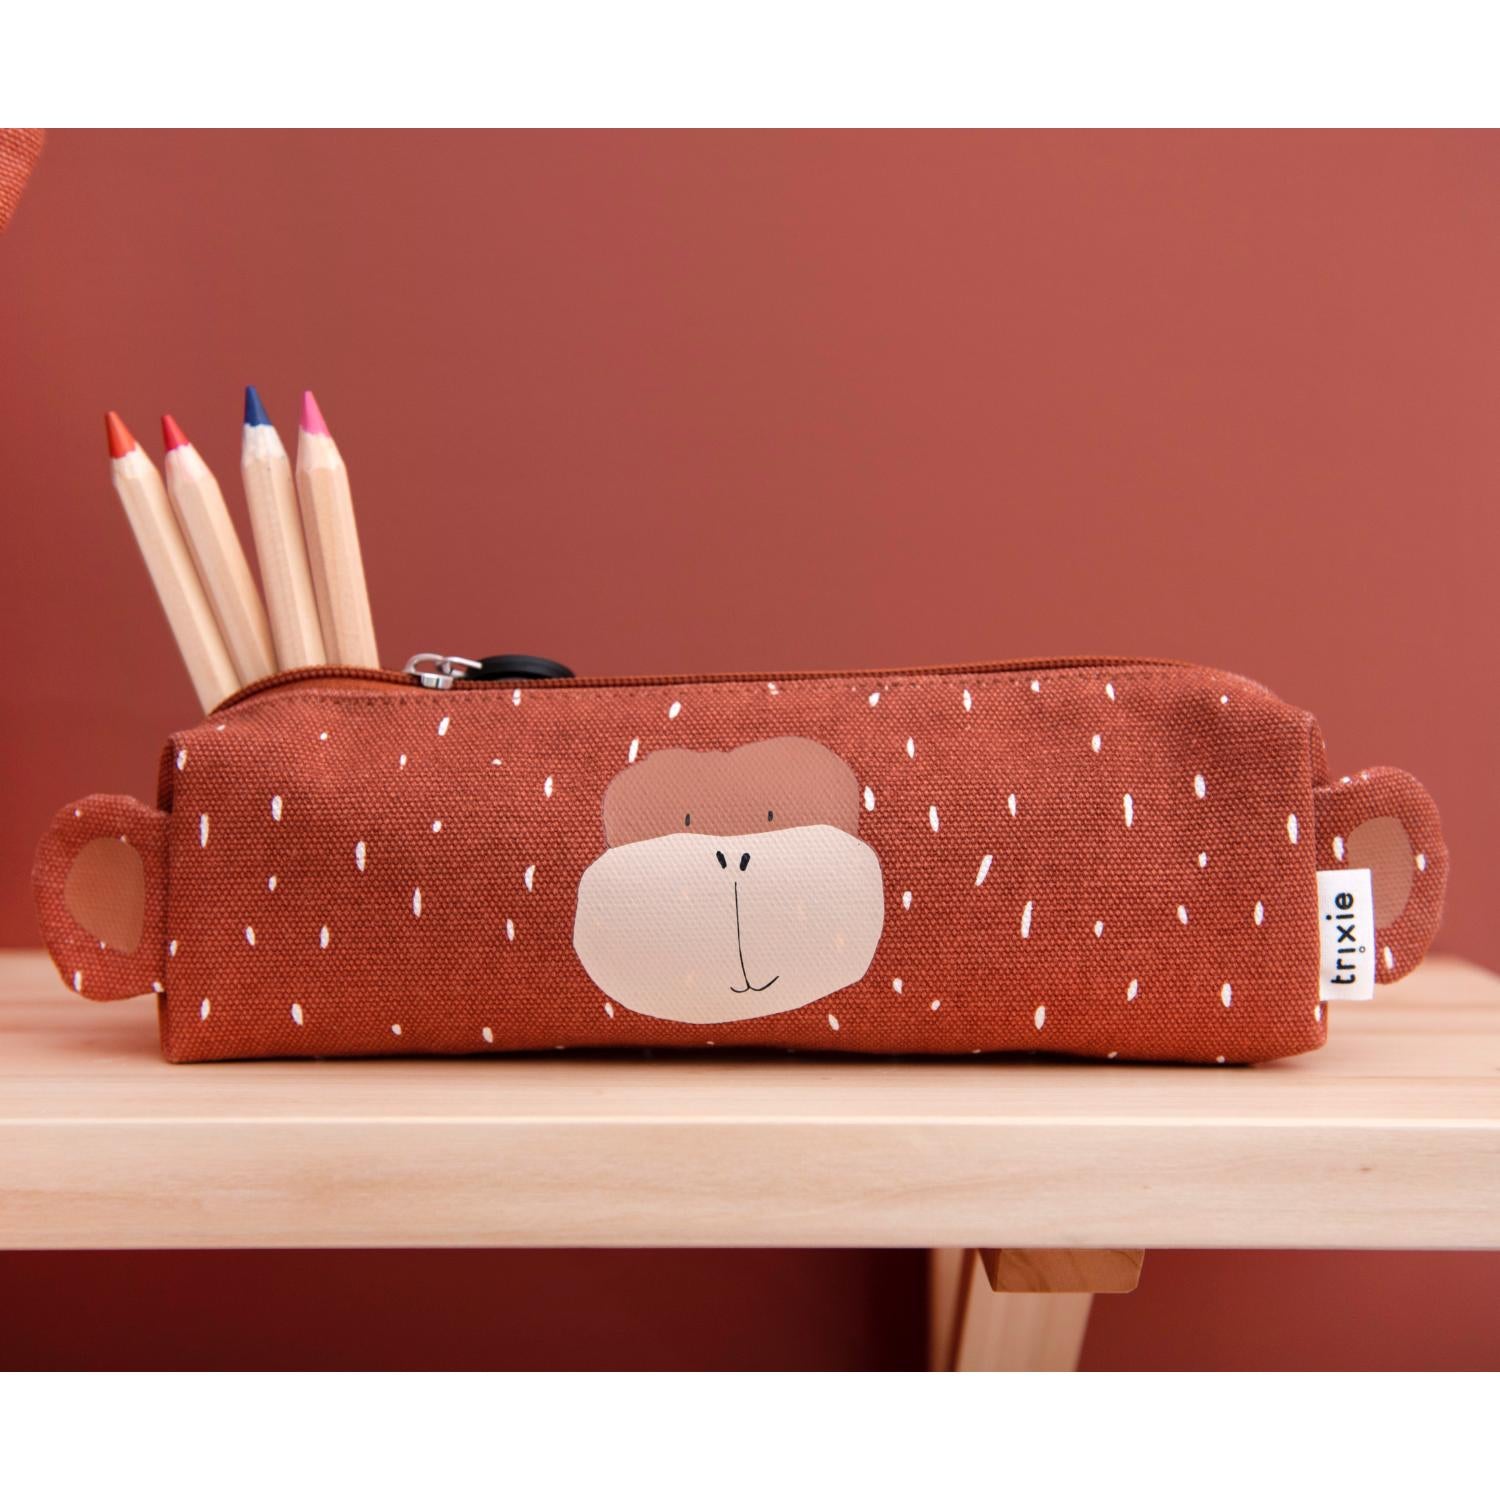 Trixie Mr. Monkey Pencil Case | Kid’s Pencil Case for Creche, Nursery & School | Lifestyle: Mr. Monkey Pencil Case with Selection of Pencils | BeoVERDE.ie